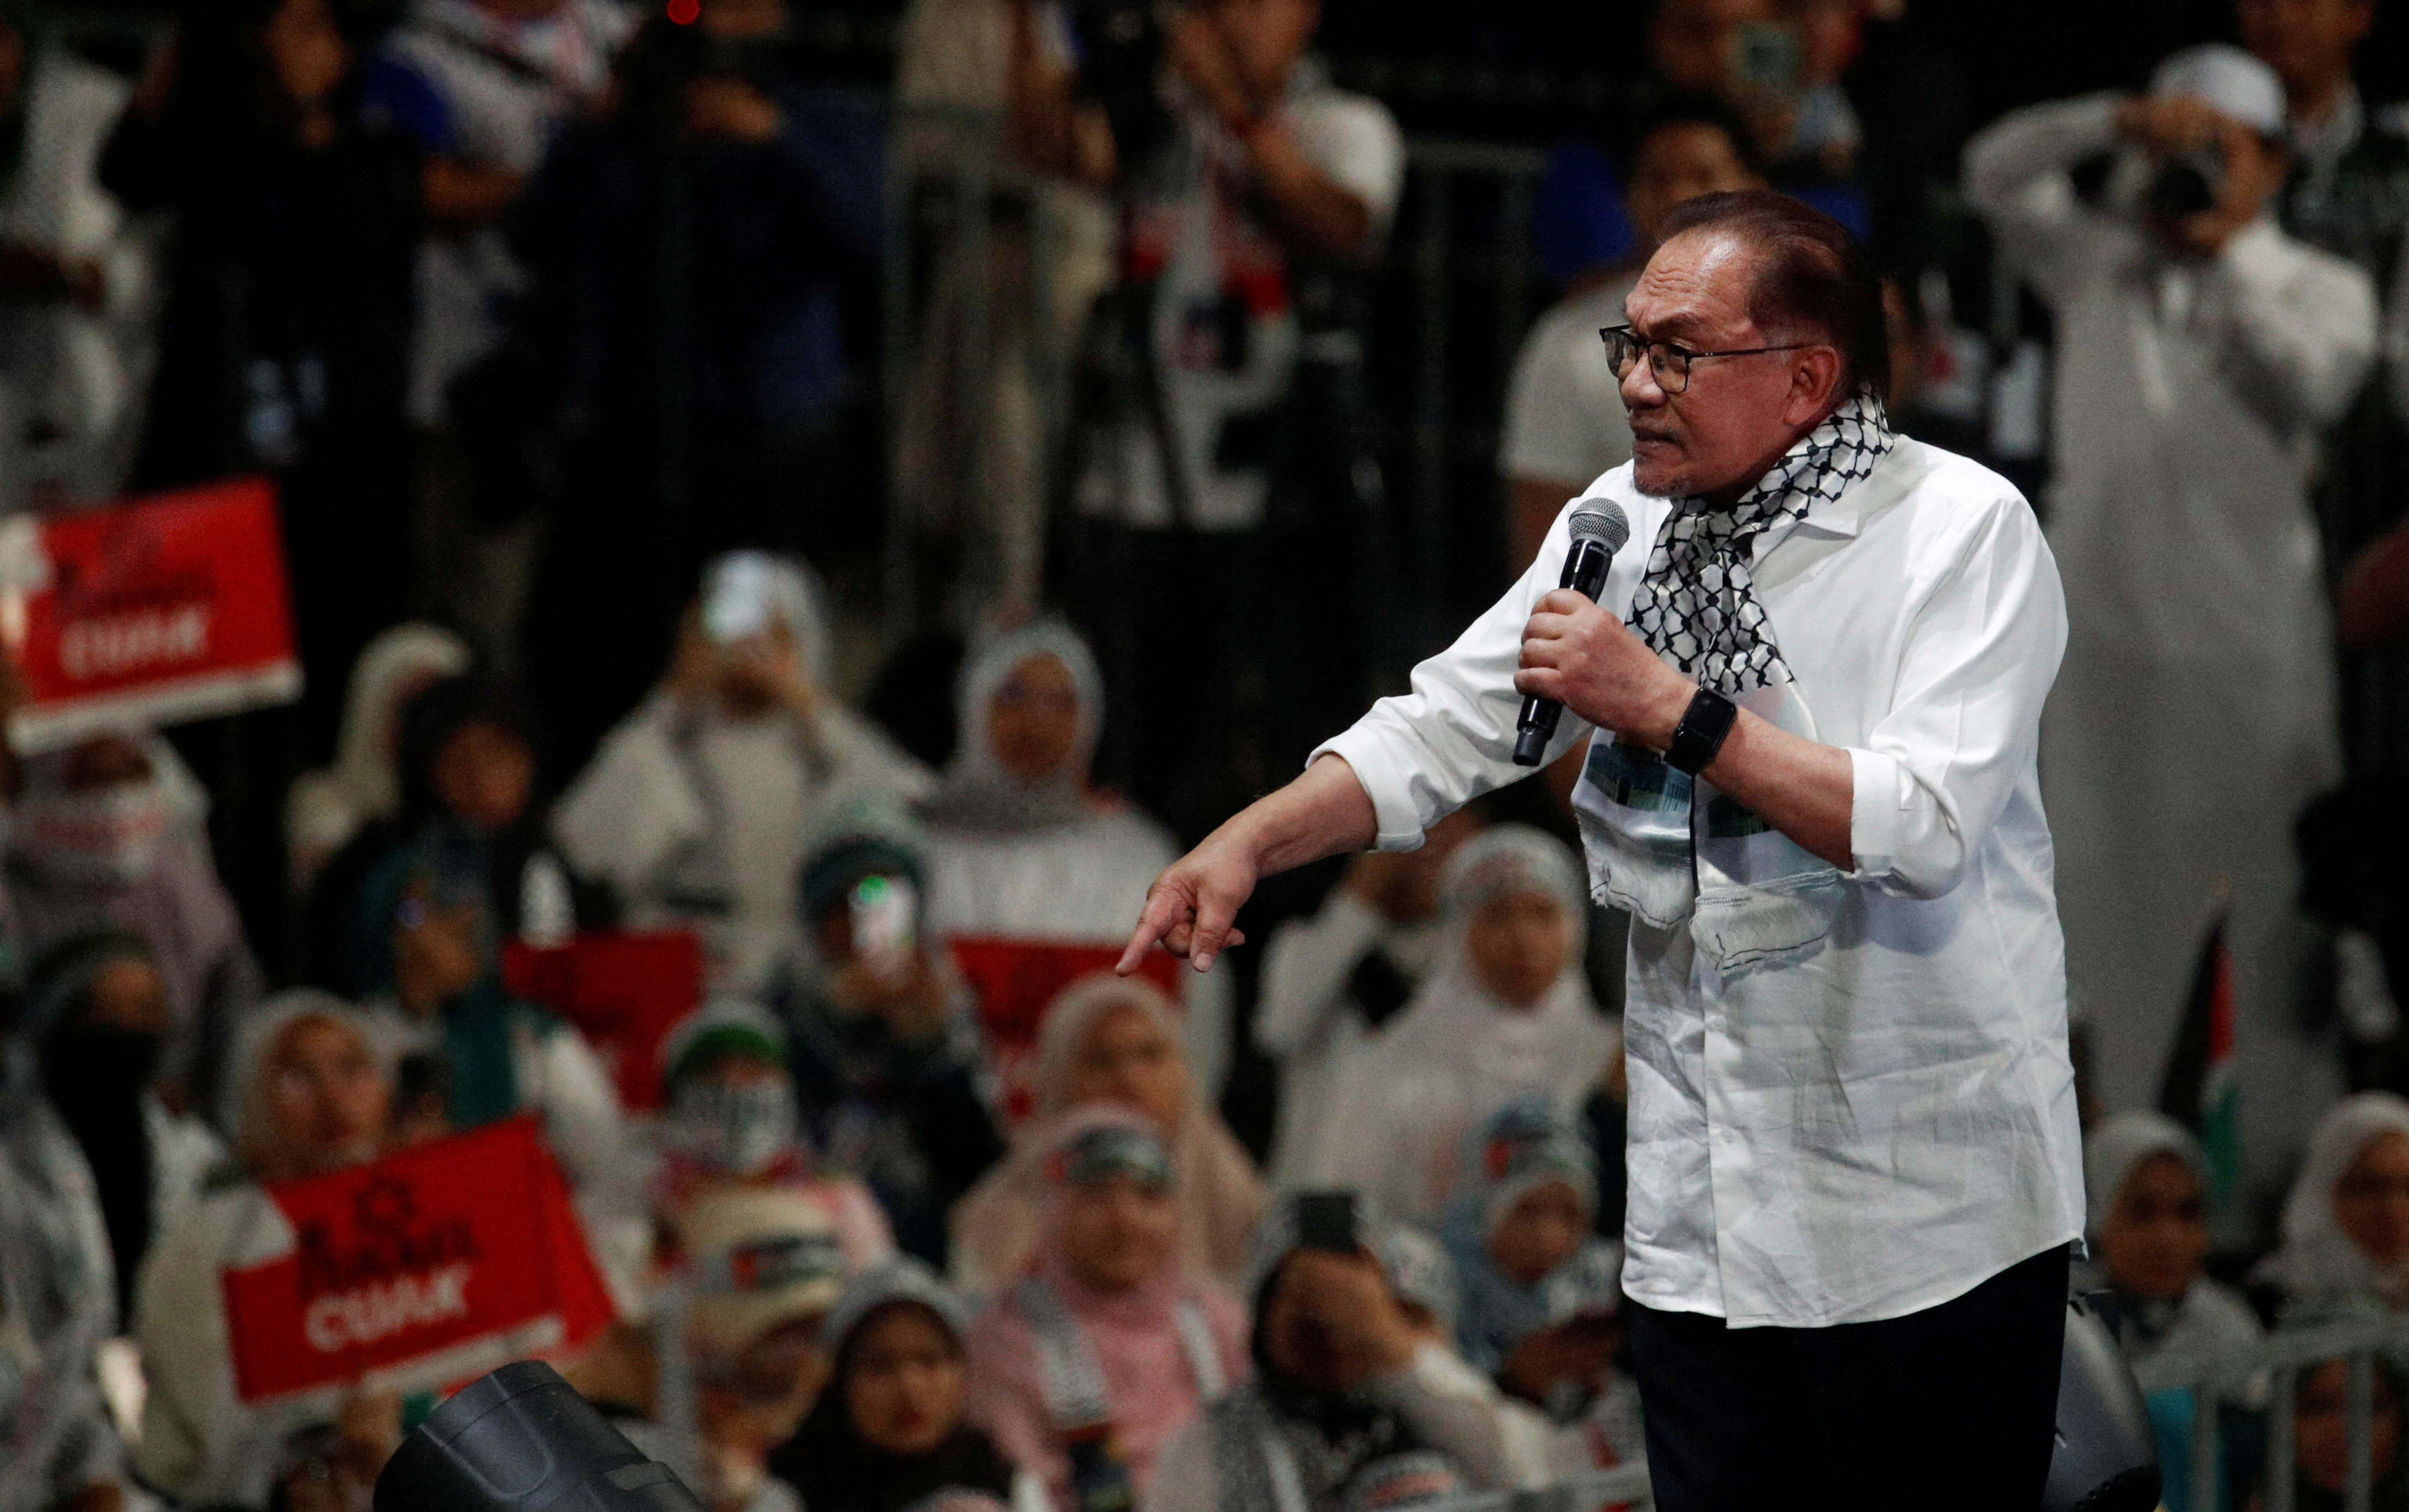 Malaysia Prime Minister Anwar Ibrahim delivers his speech during a solidarity gathering to show support for Palestinians in Kuala Lumpur